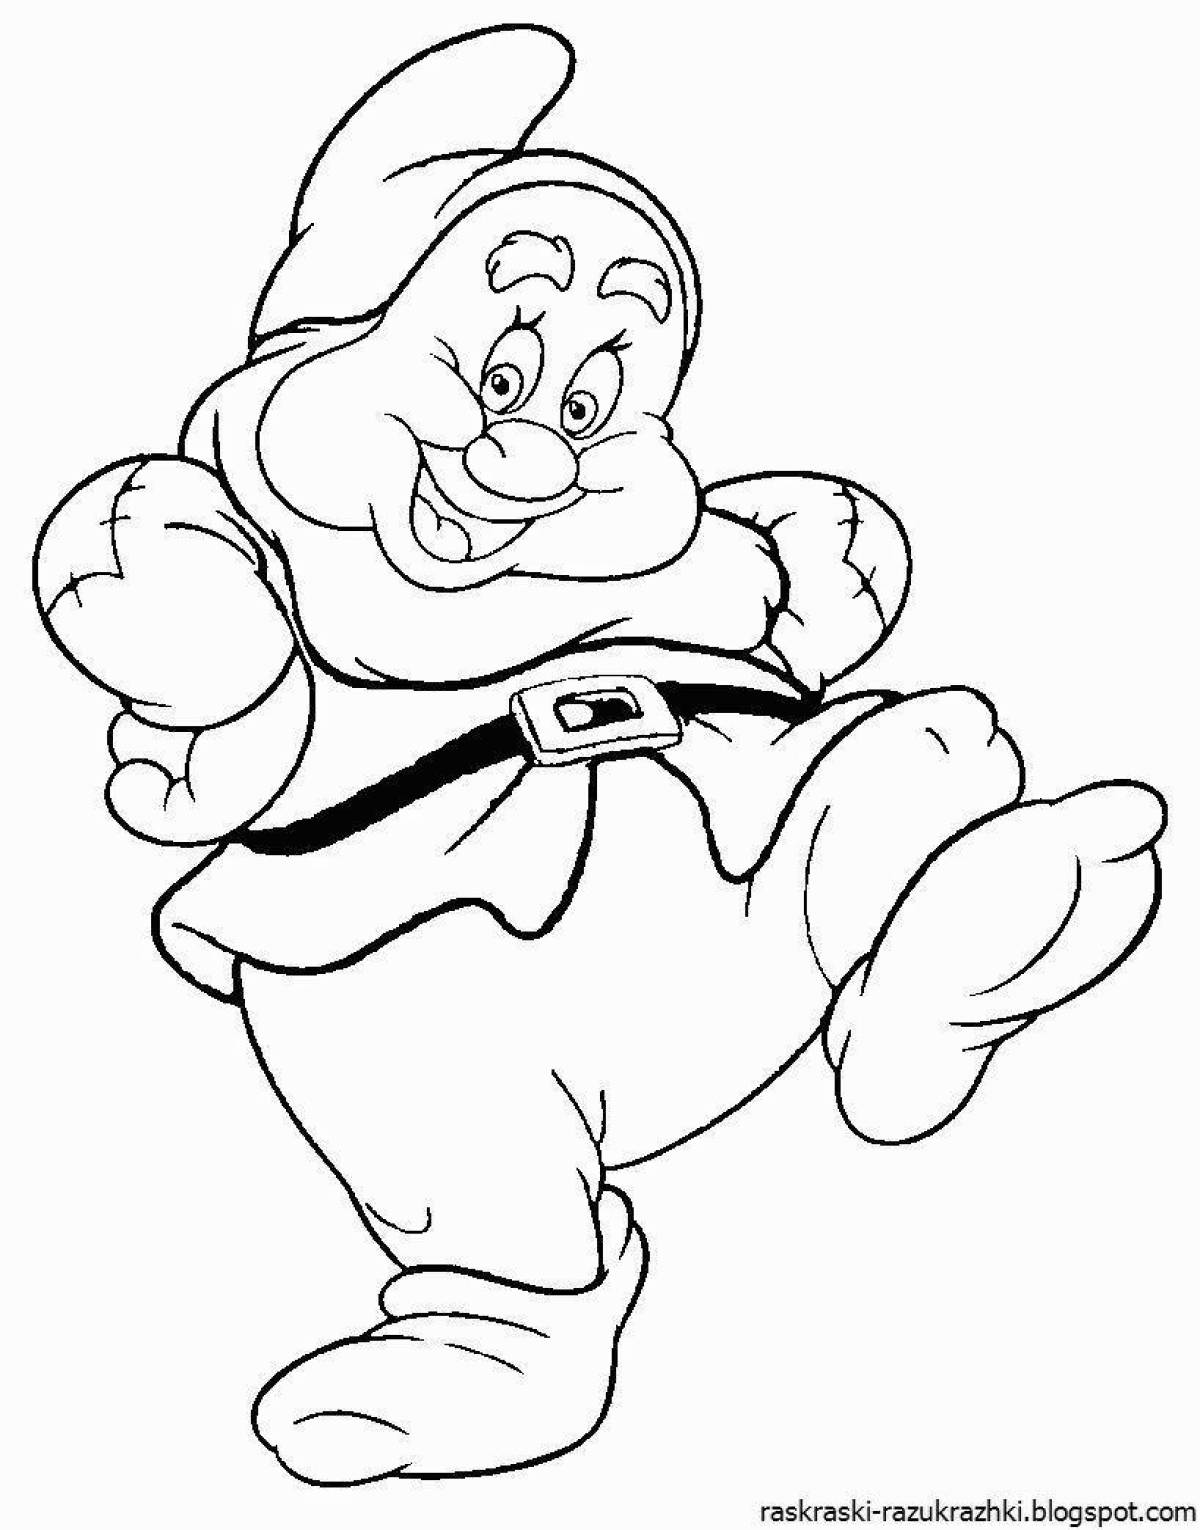 Funny gnome coloring pages